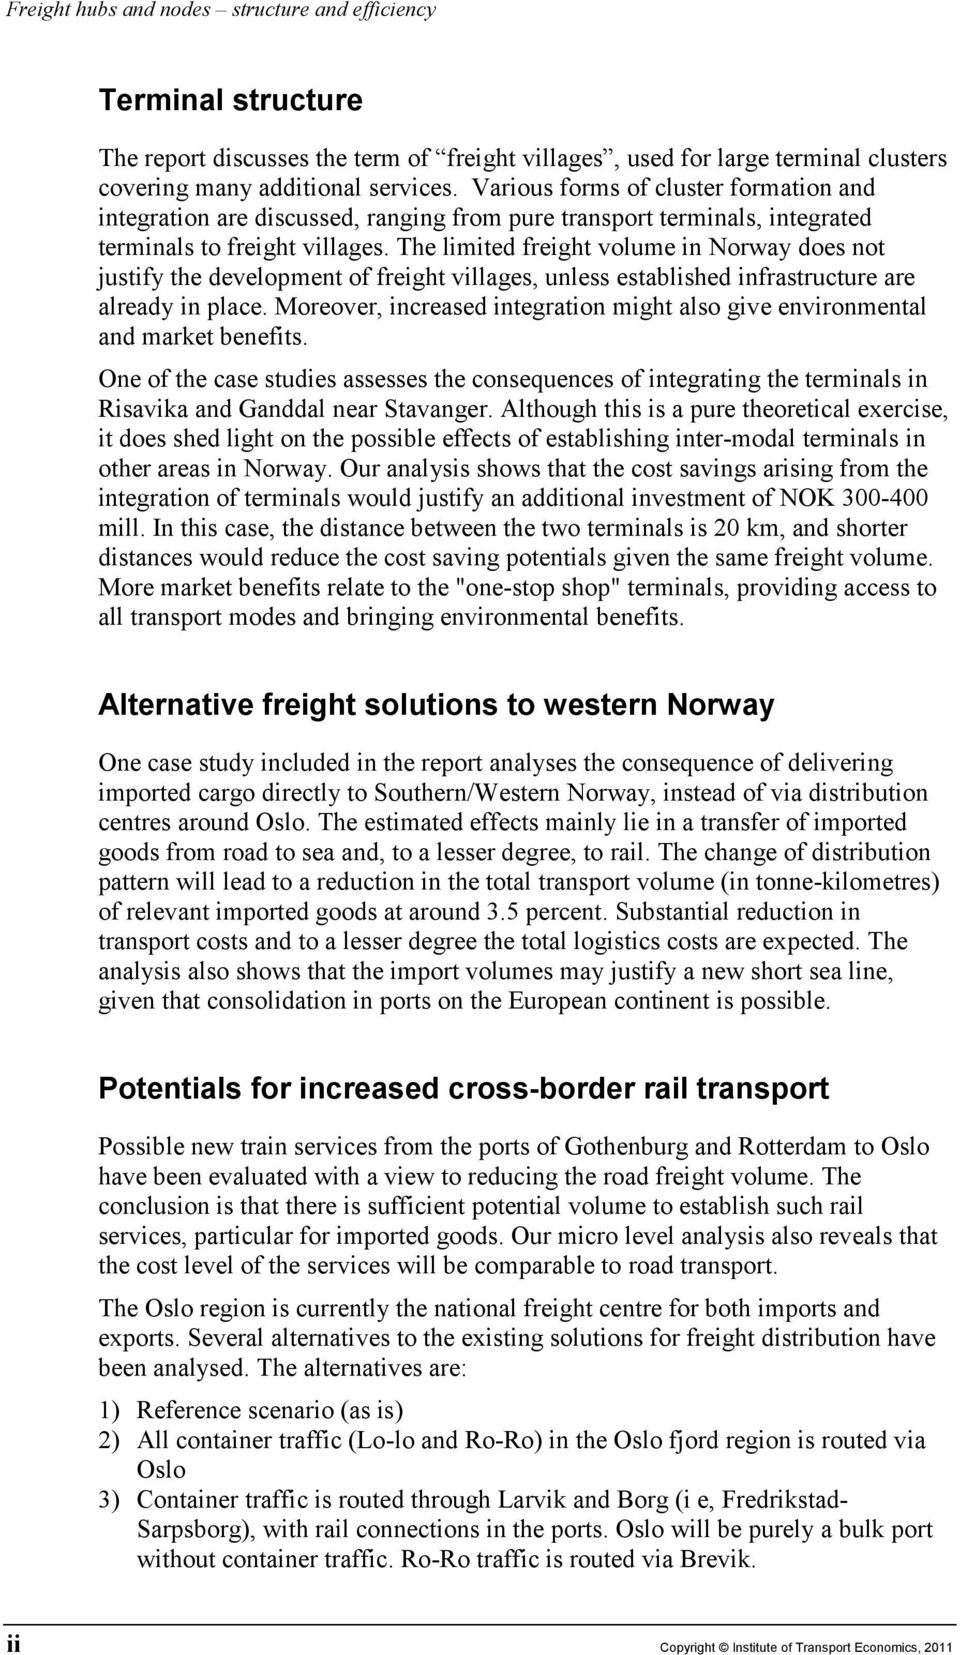 The limited freight volume in Norway does not justify the development of freight villages, unless established infrastructure are already in place.